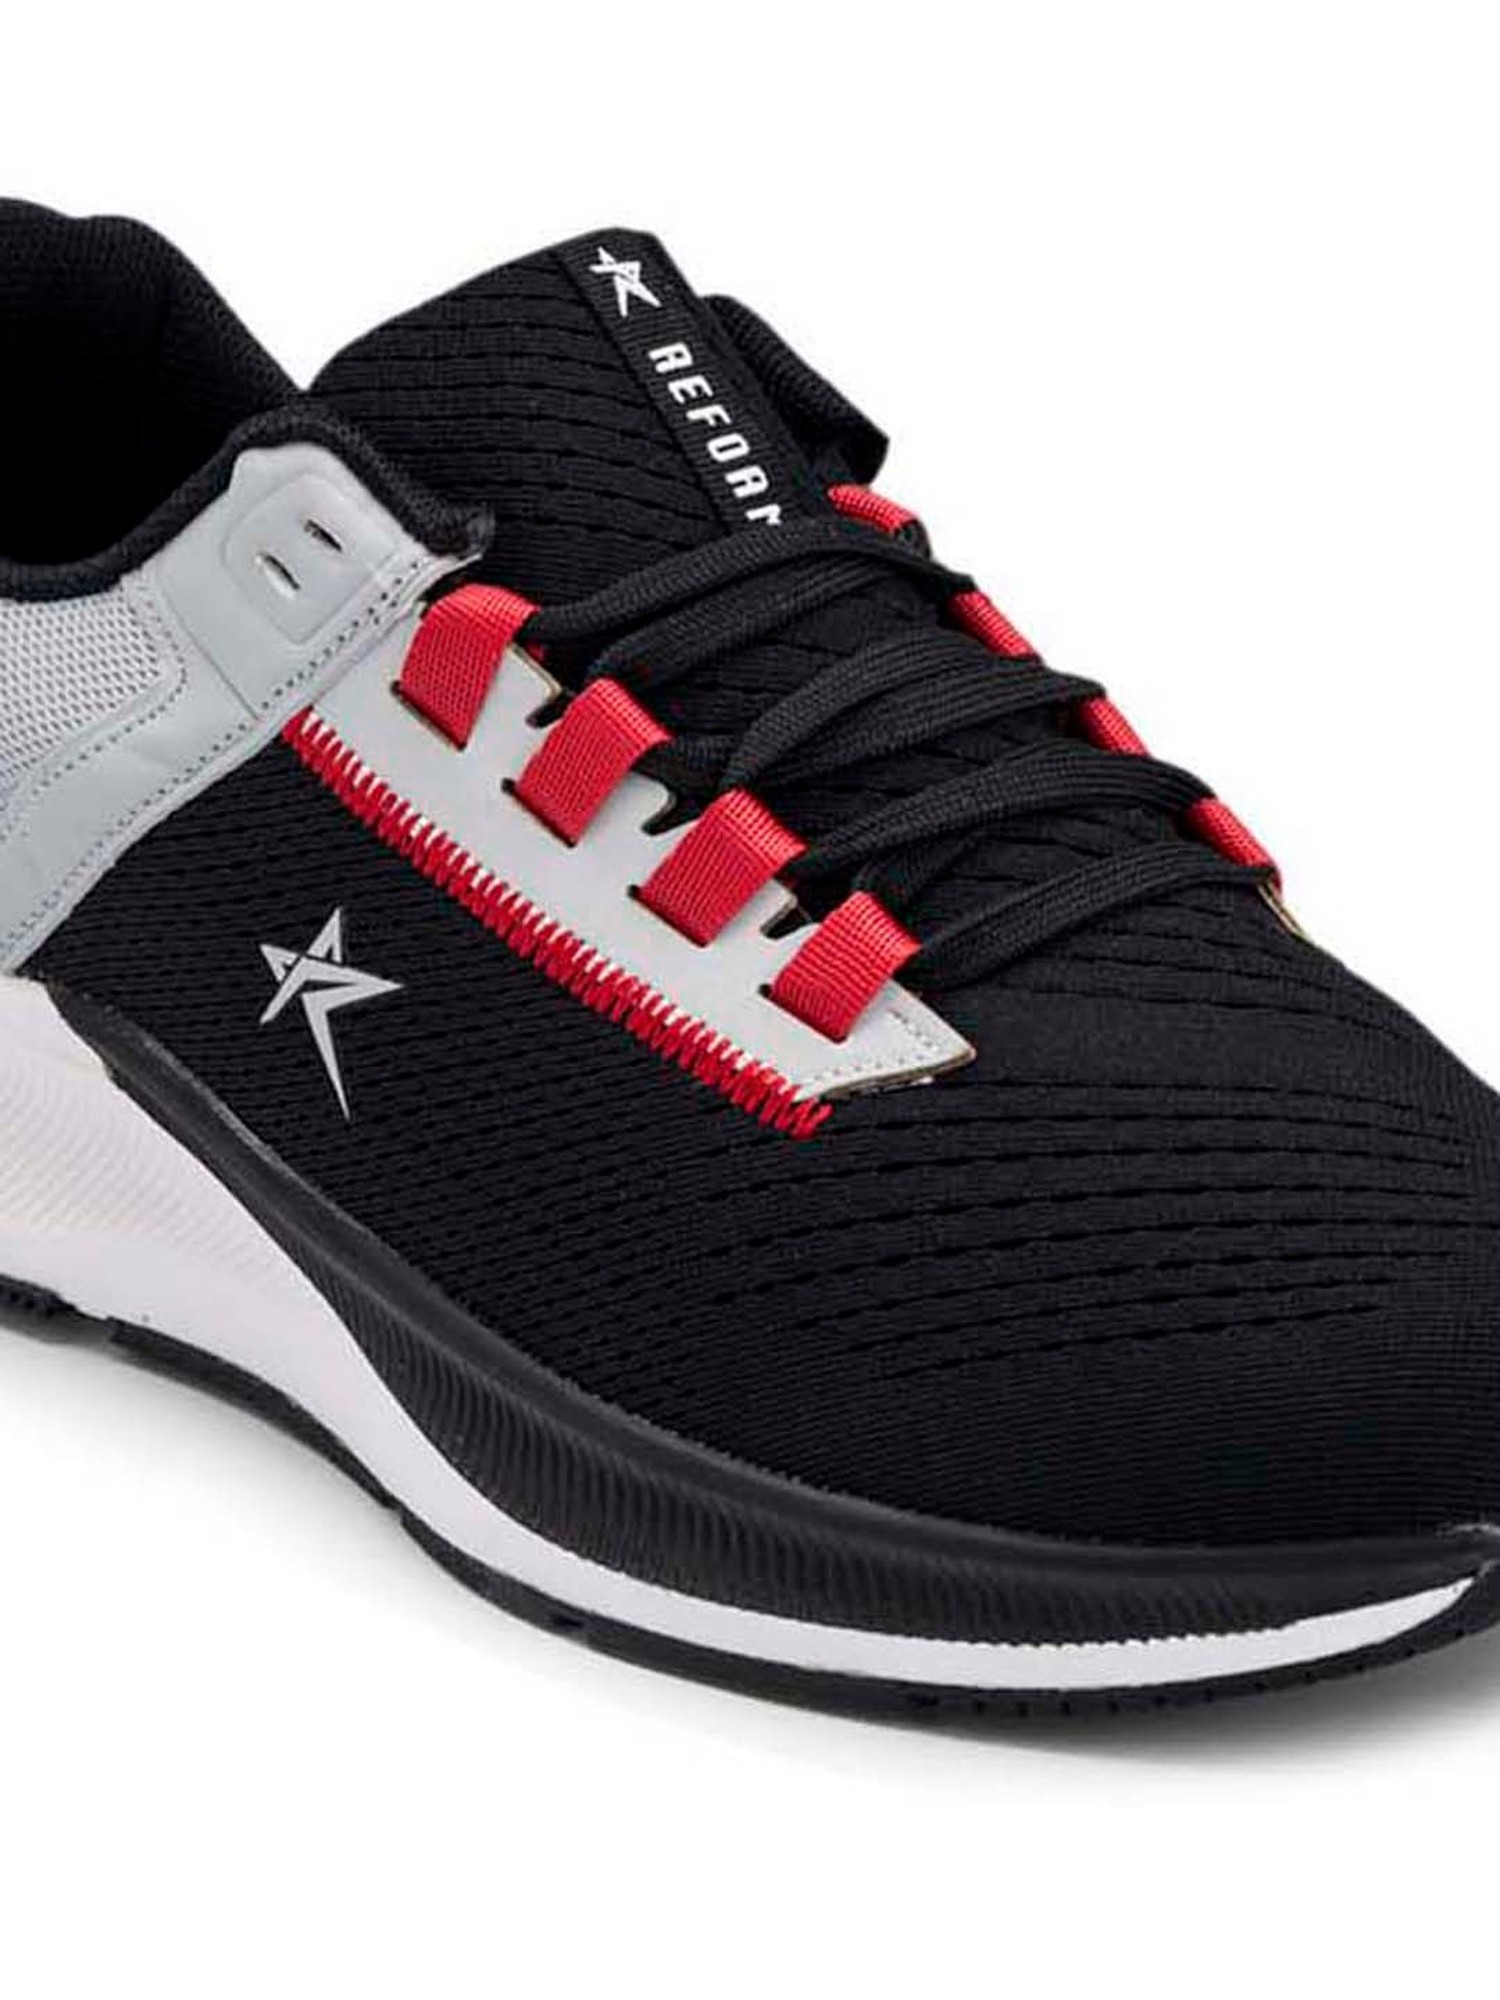 REFOAM White Running Shoes - Buy REFOAM White Running Shoes Online at Best  Prices in India on Snapdeal